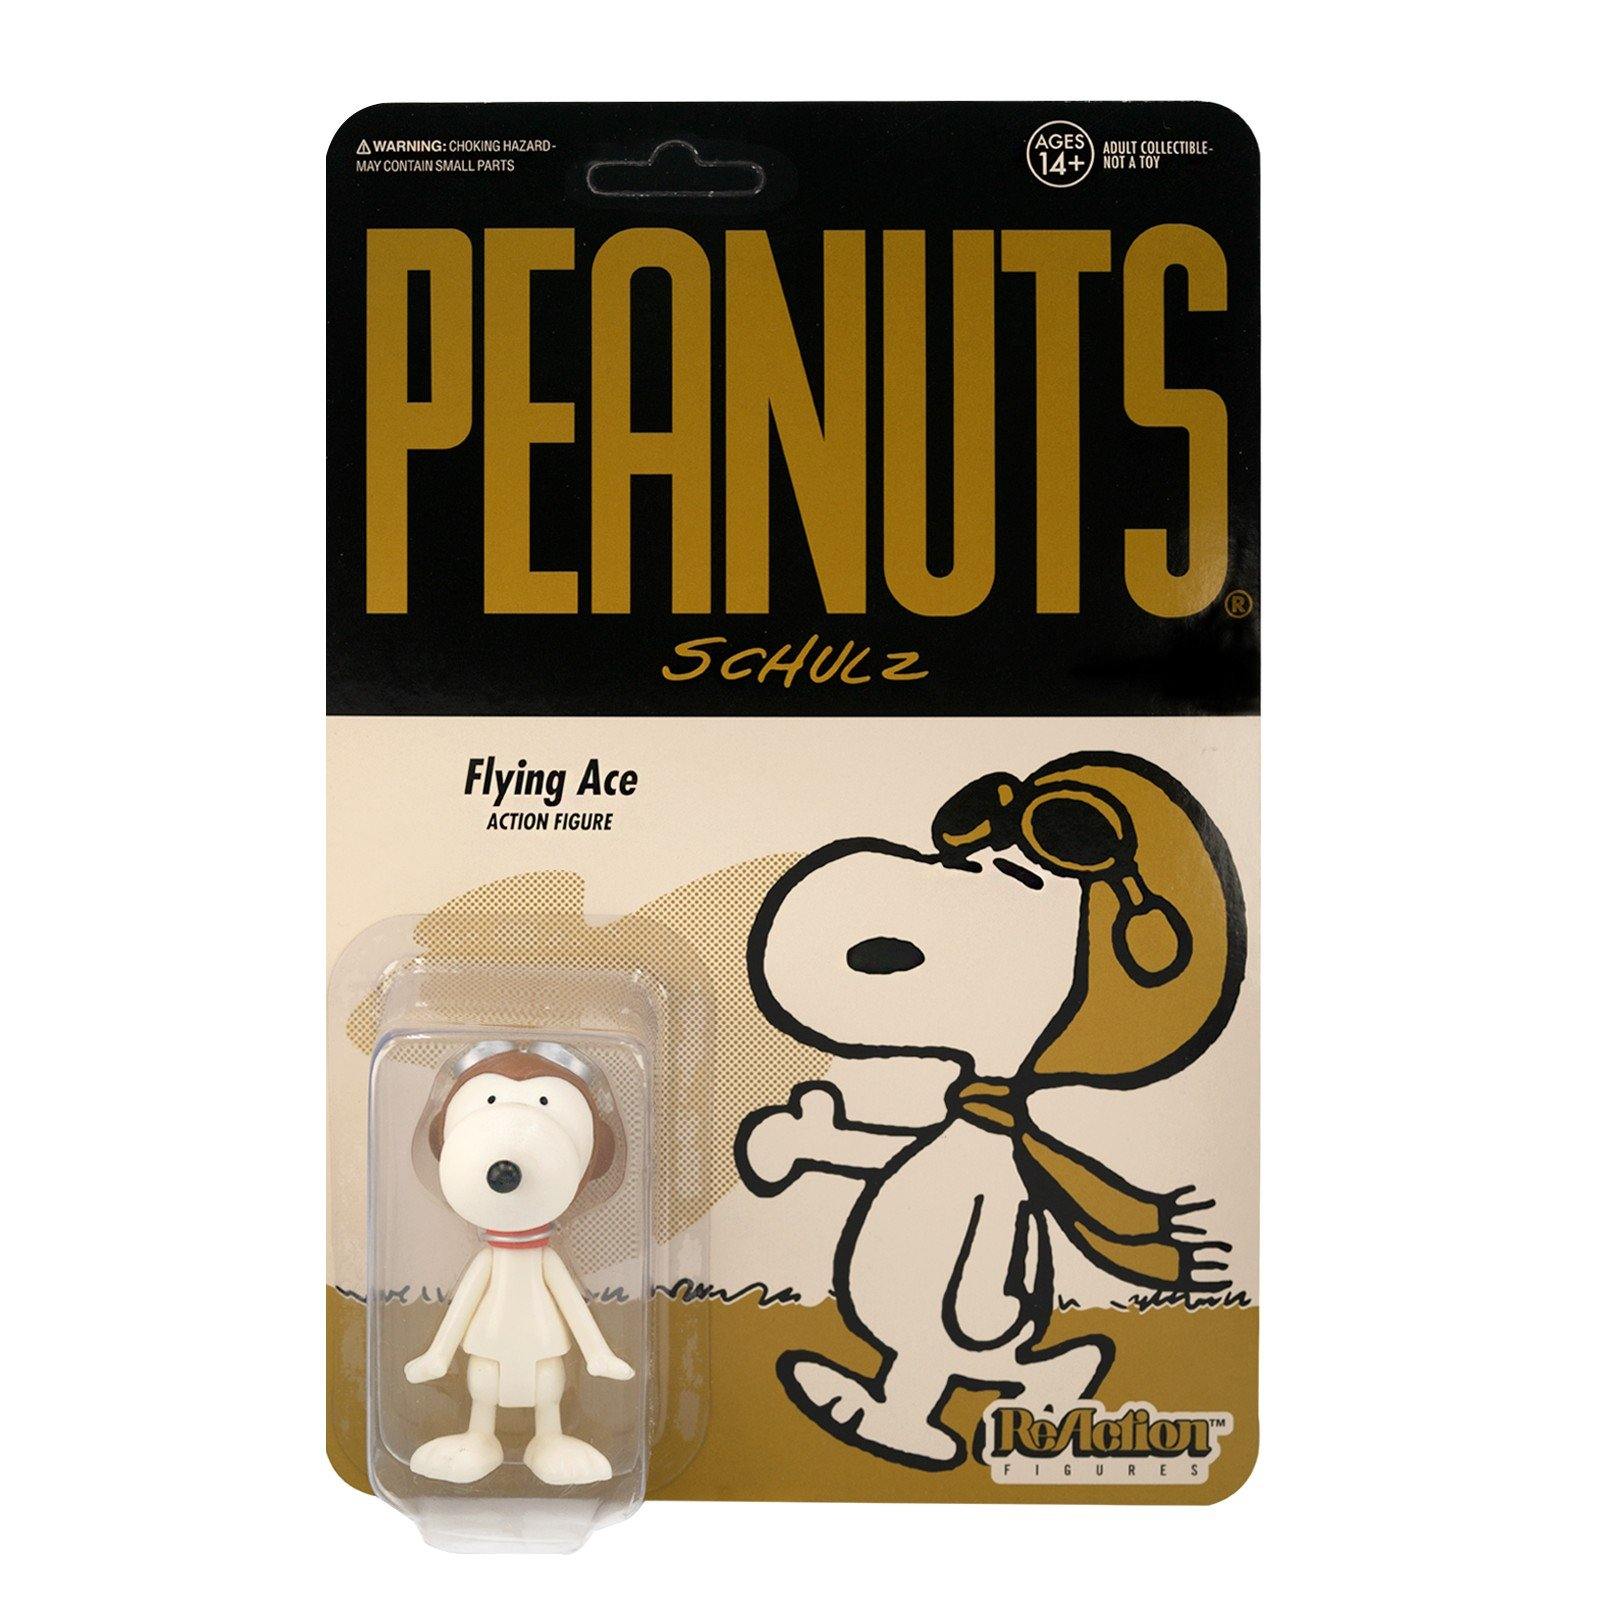 Peanuts Wave 2: Snoopy Flying Ace ReAction Figure 8 cm - Peanuts, Snoopy, Snoopy Flying Ace, super7 - Gadgetz Home